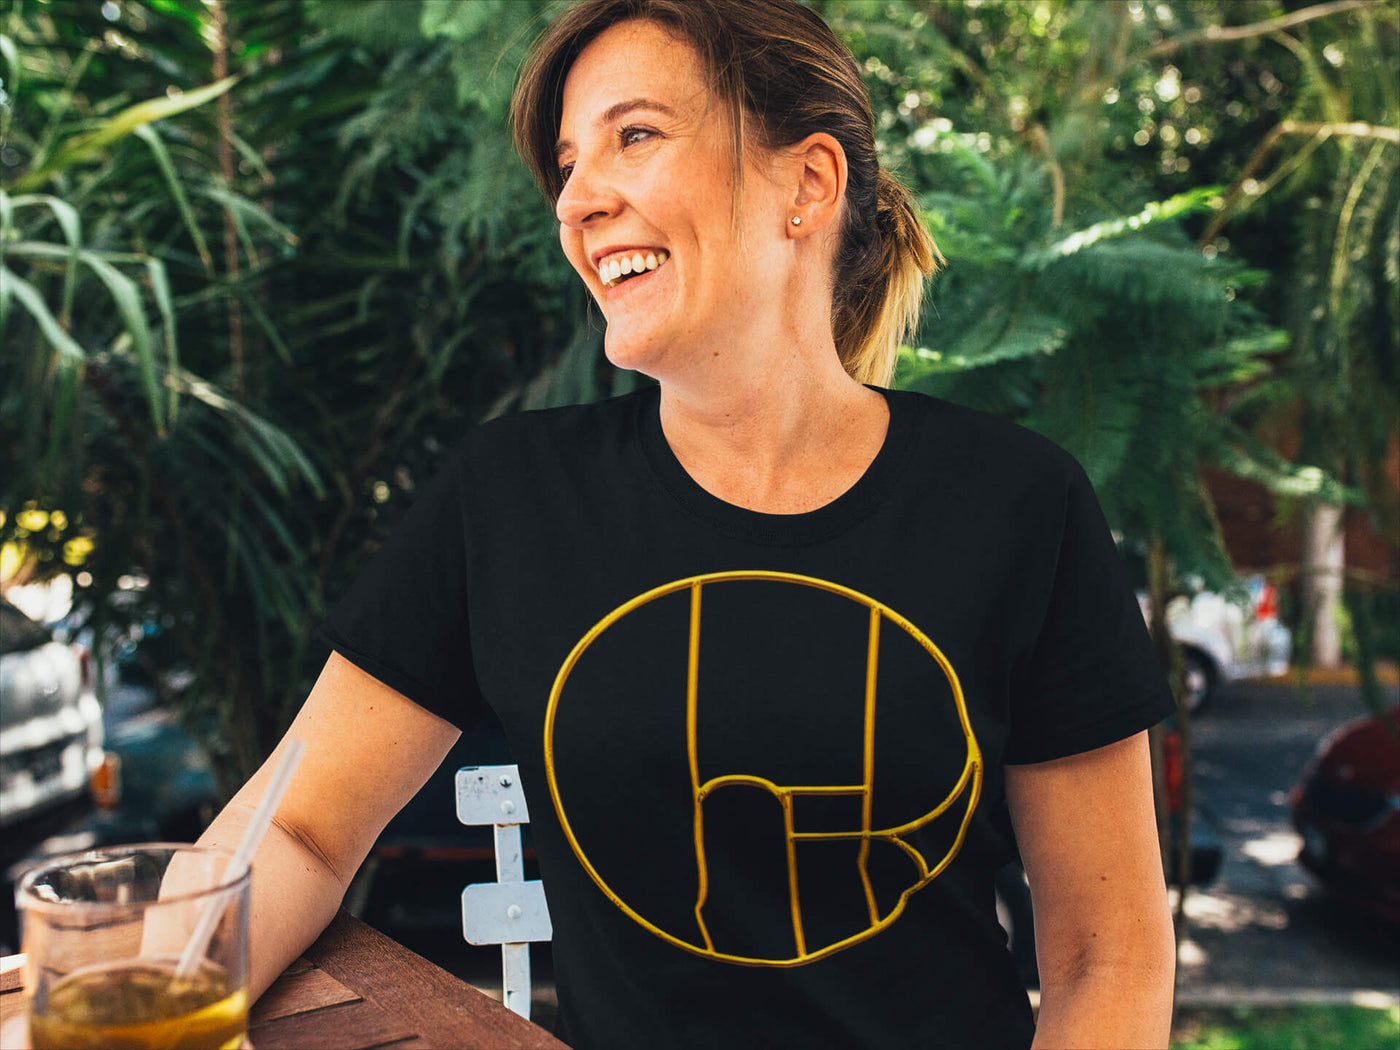 Middle-aged woman wearing Gllamazon's From Television City Premium Unisex T-shirt. Design inspired by Cher's CBS solo variety TV show The Cher Show (1975-76).